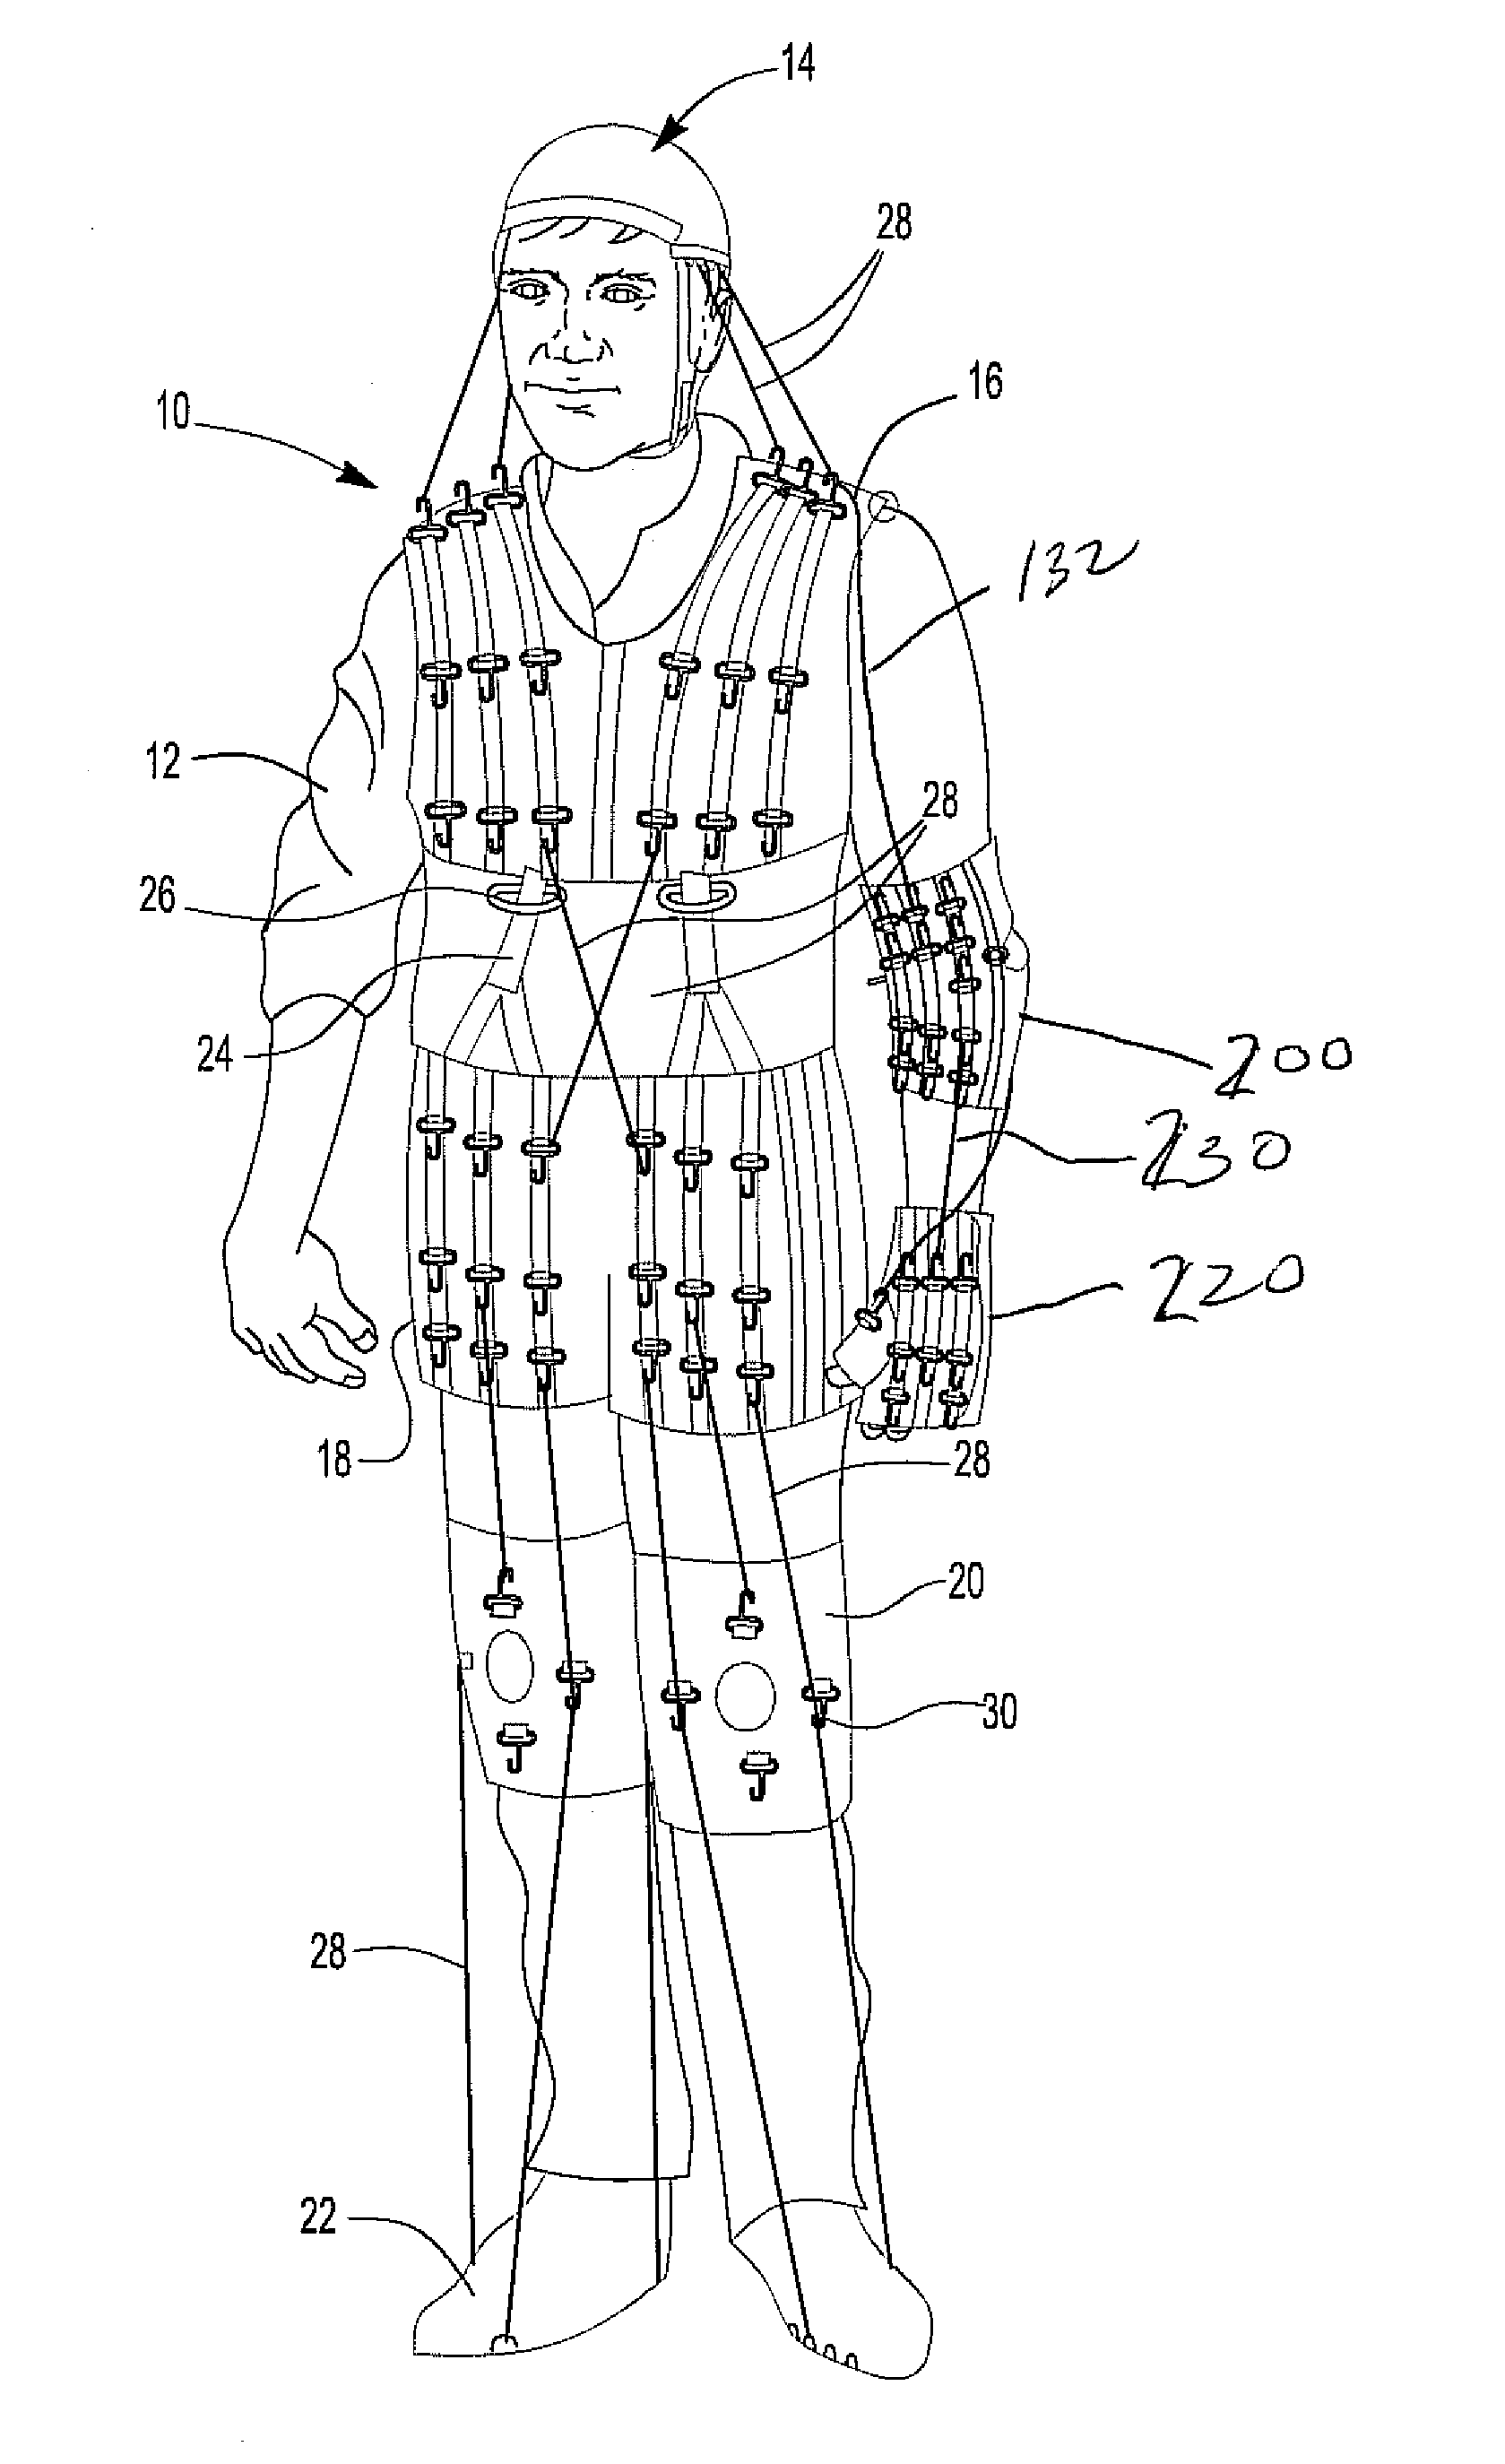 Neurological motor therapy suit